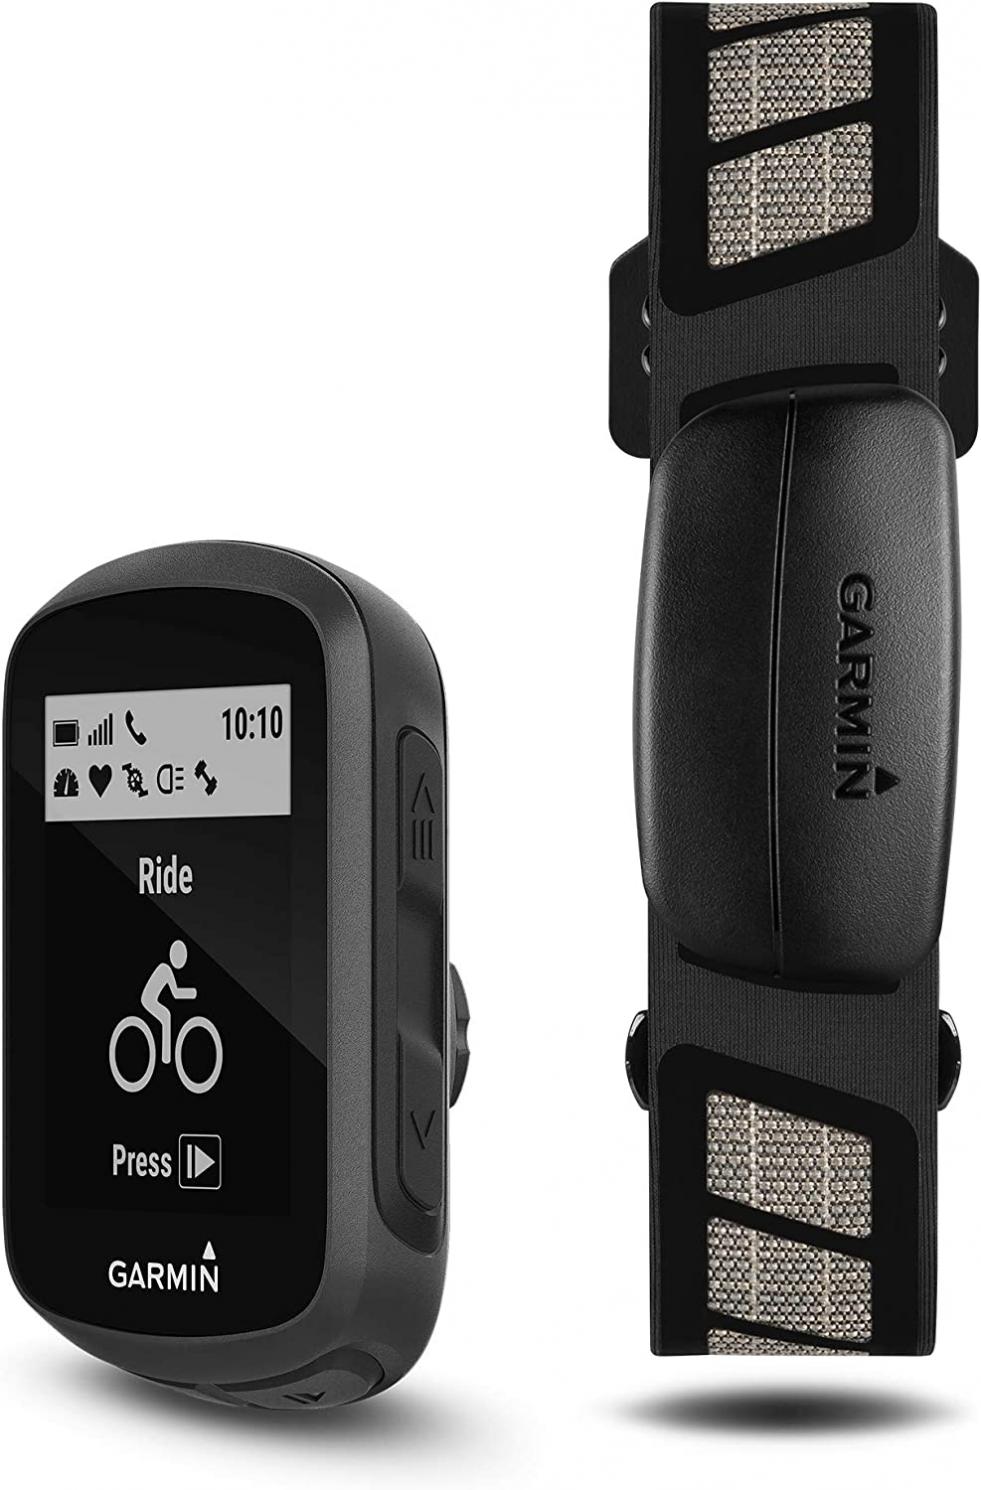 Garmin Edge® 130 Plus Bundle, GPS Cycling/Bike Computer with Sensors and HR Monitor, Download Structure Workouts, ClimbPro Pacing Guidance and More (010-02385-10)